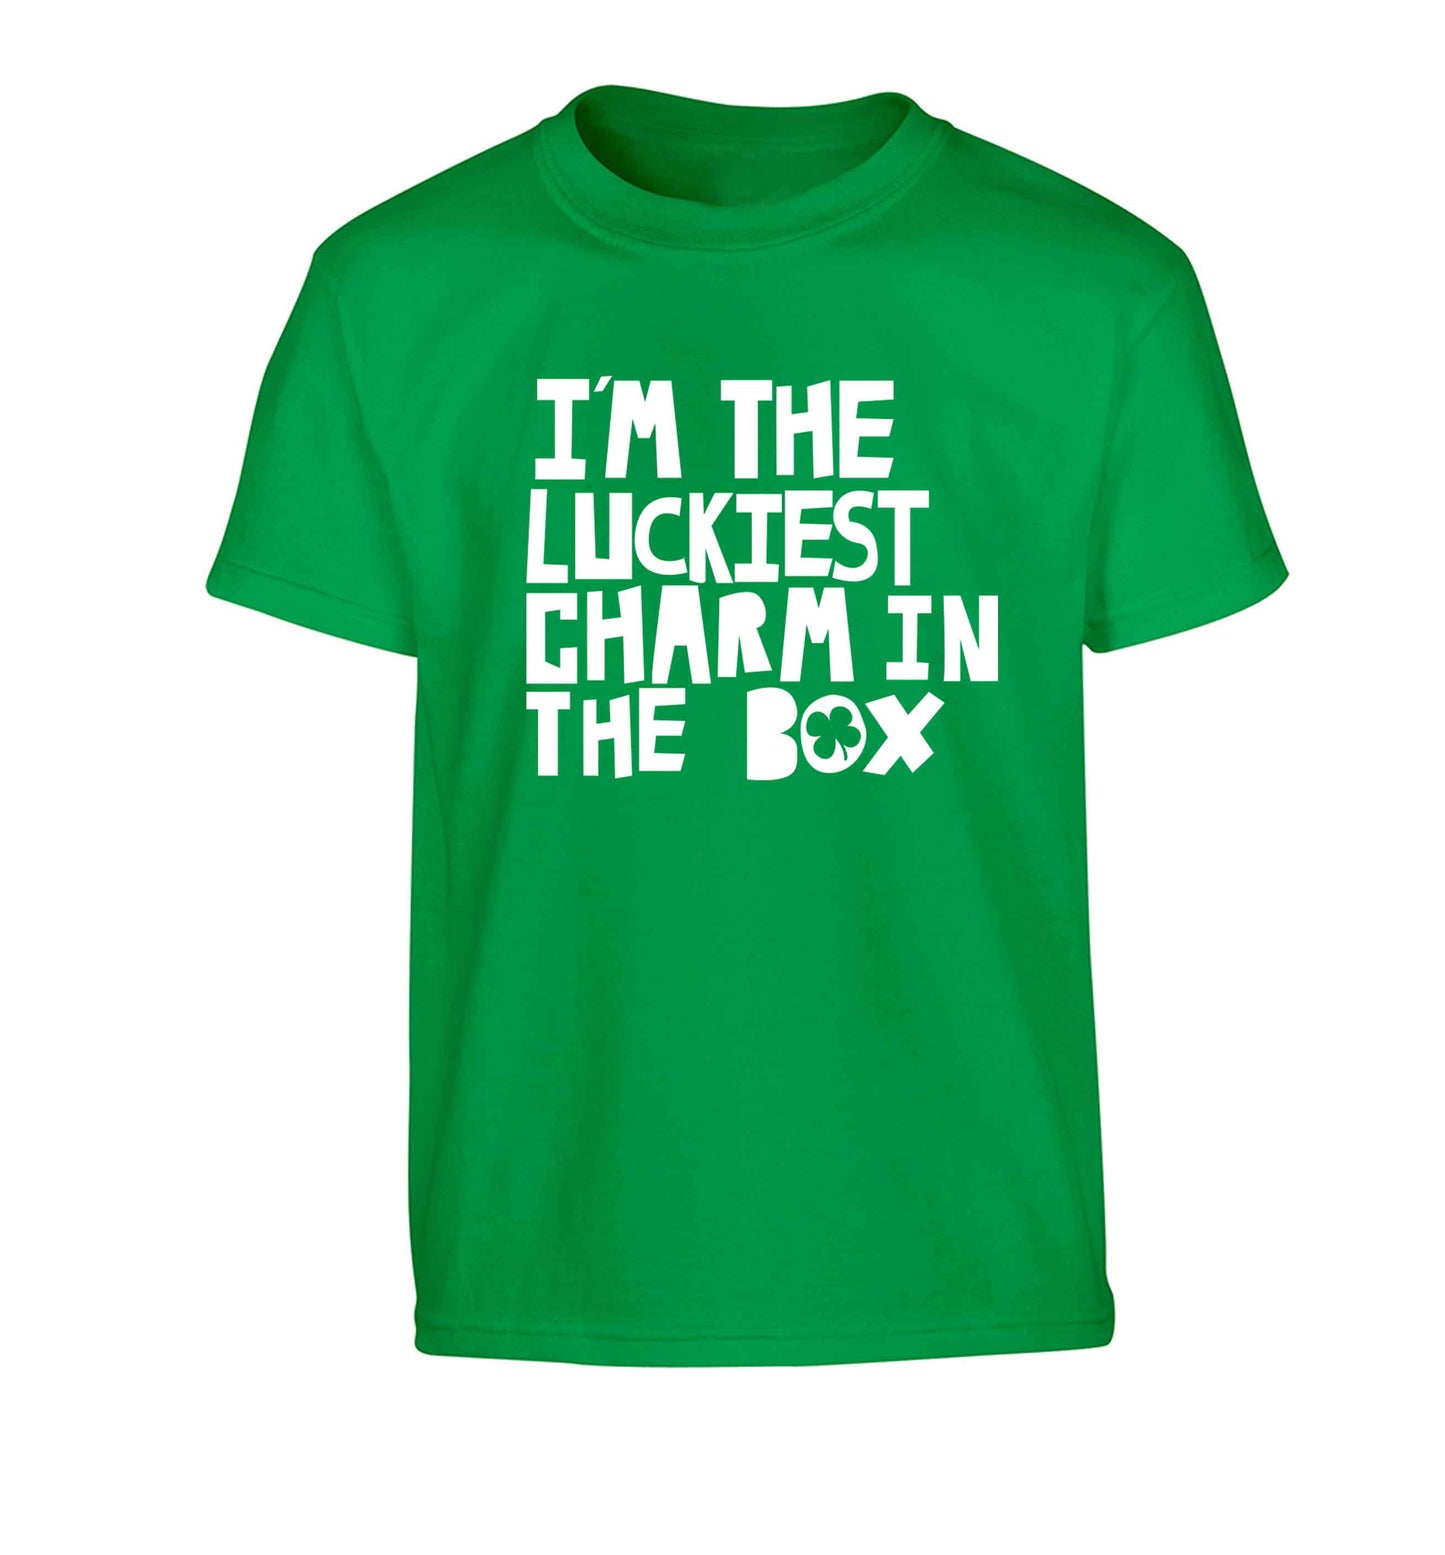 I'm the luckiest charm in the box Children's green Tshirt 12-13 Years